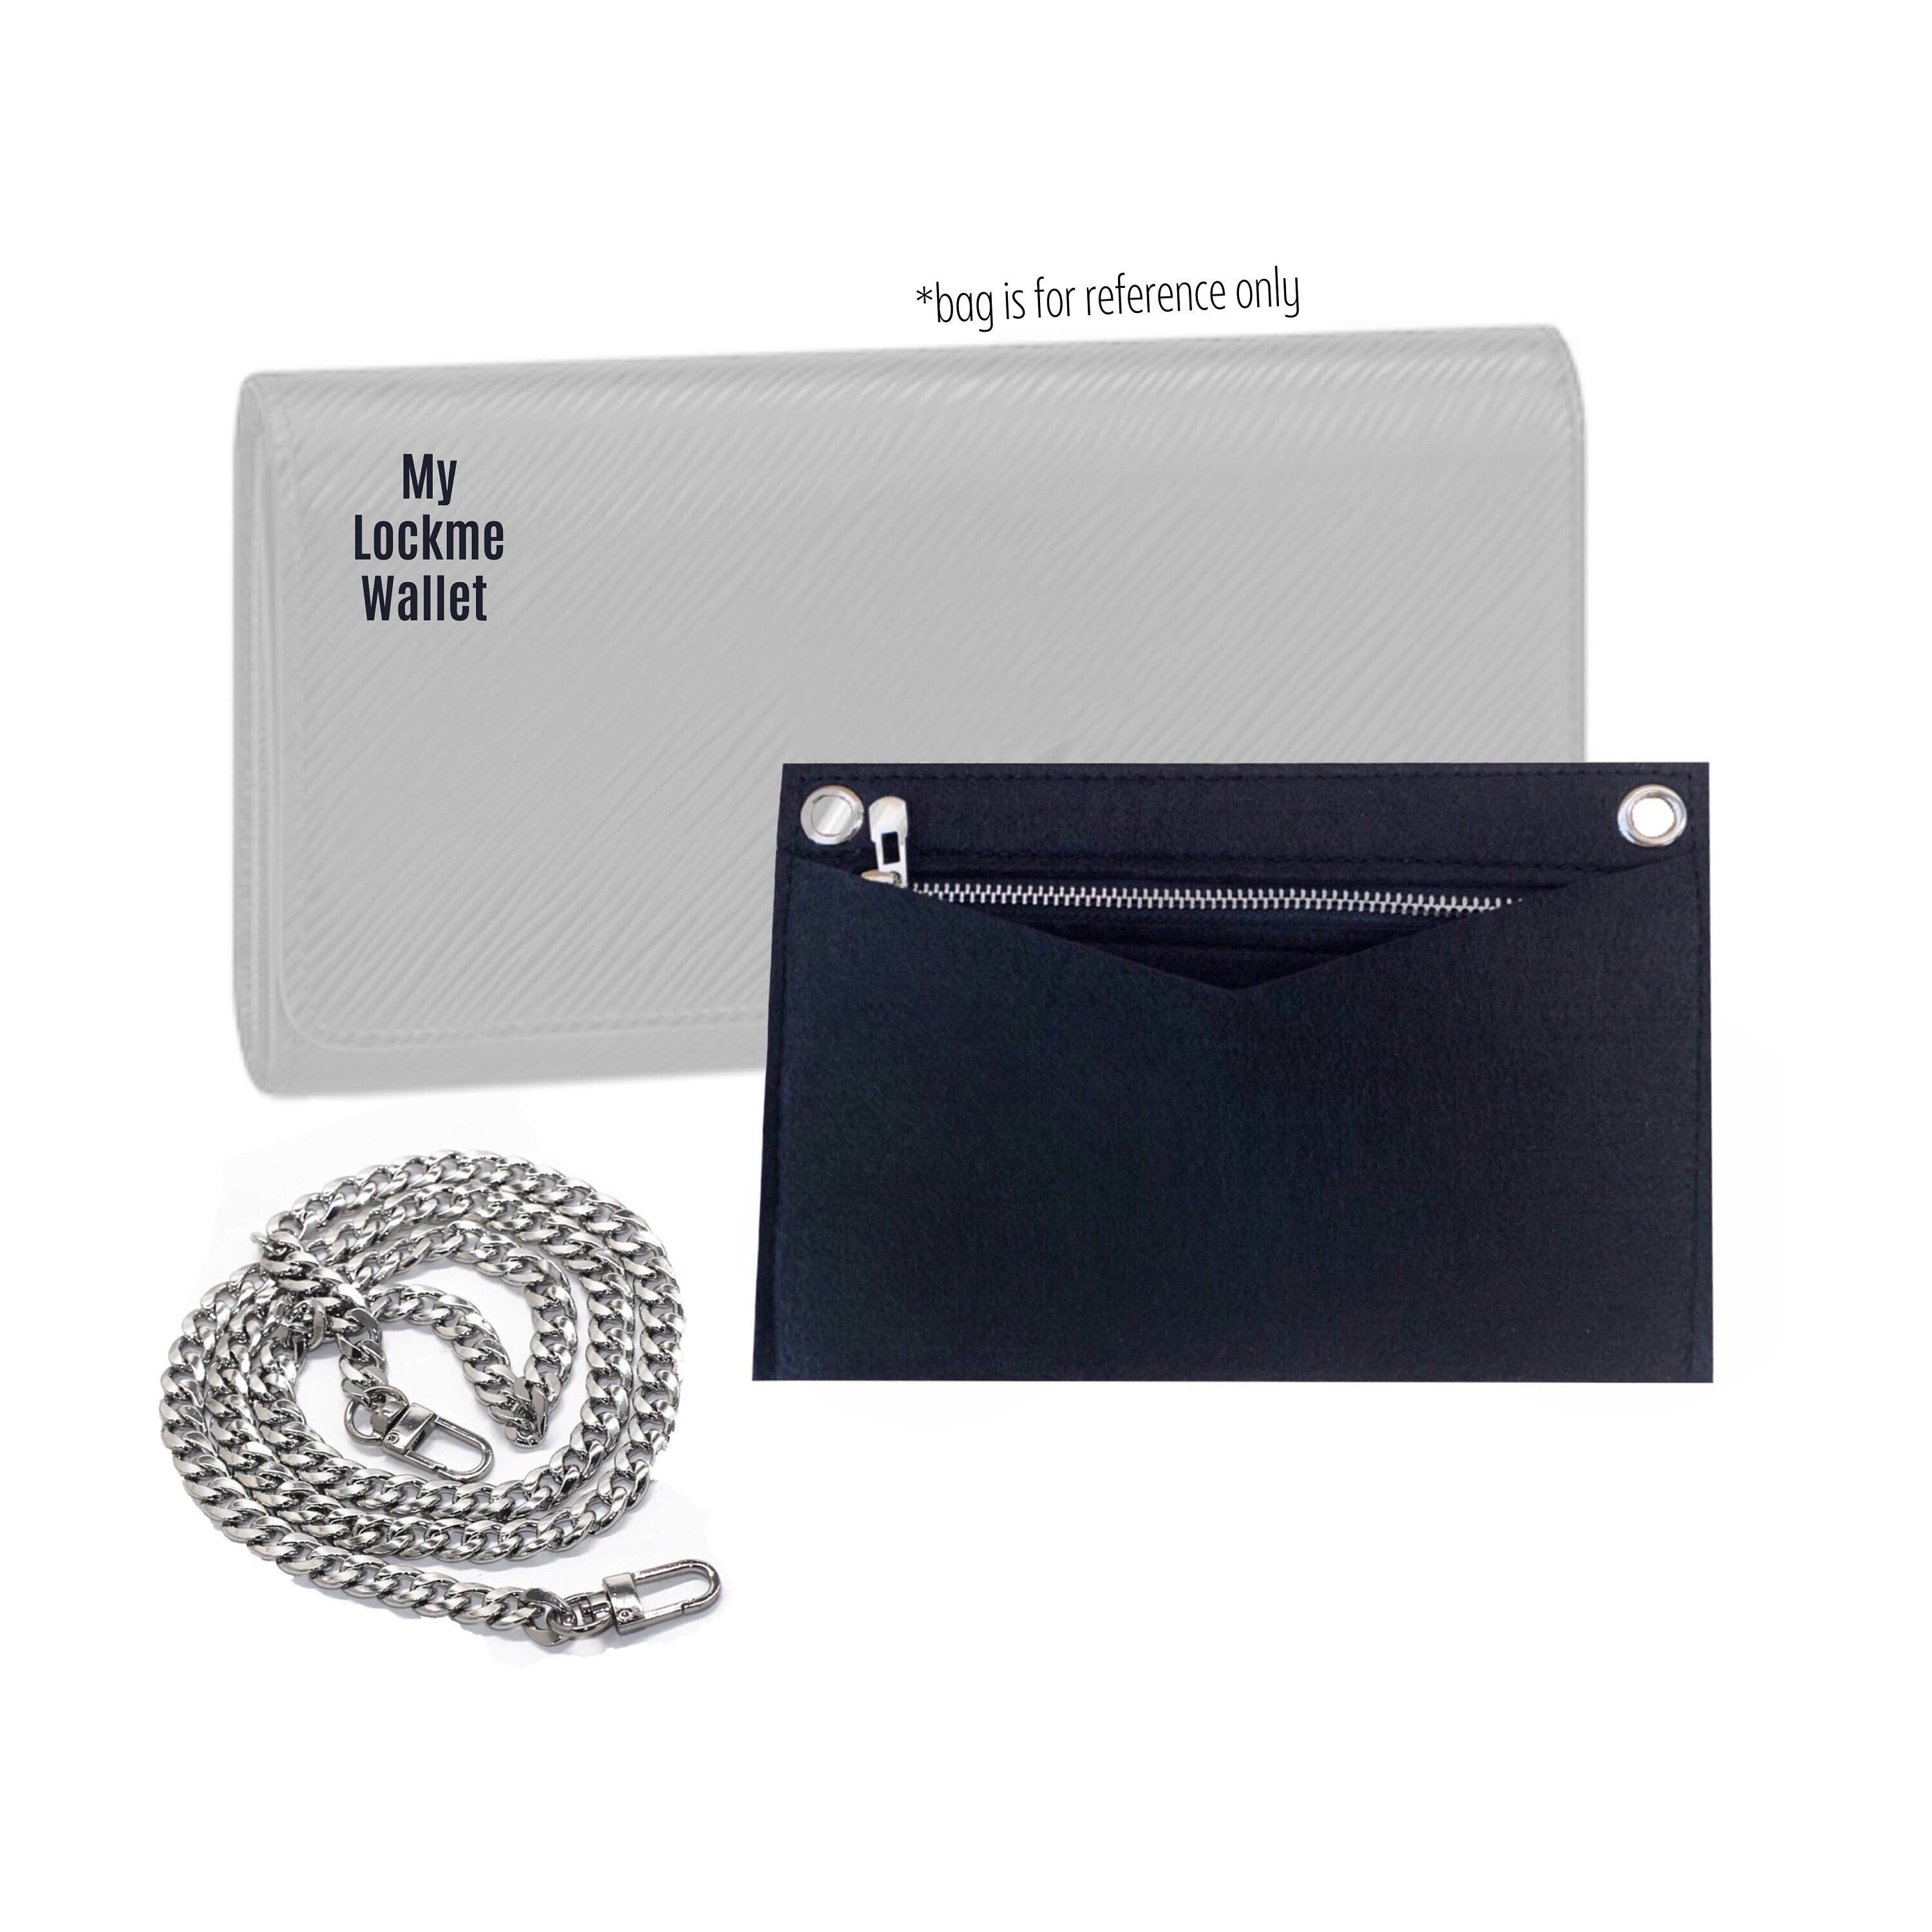 Mylockme Wallet Conversion Kit with Zipper Bag & O Rings / 